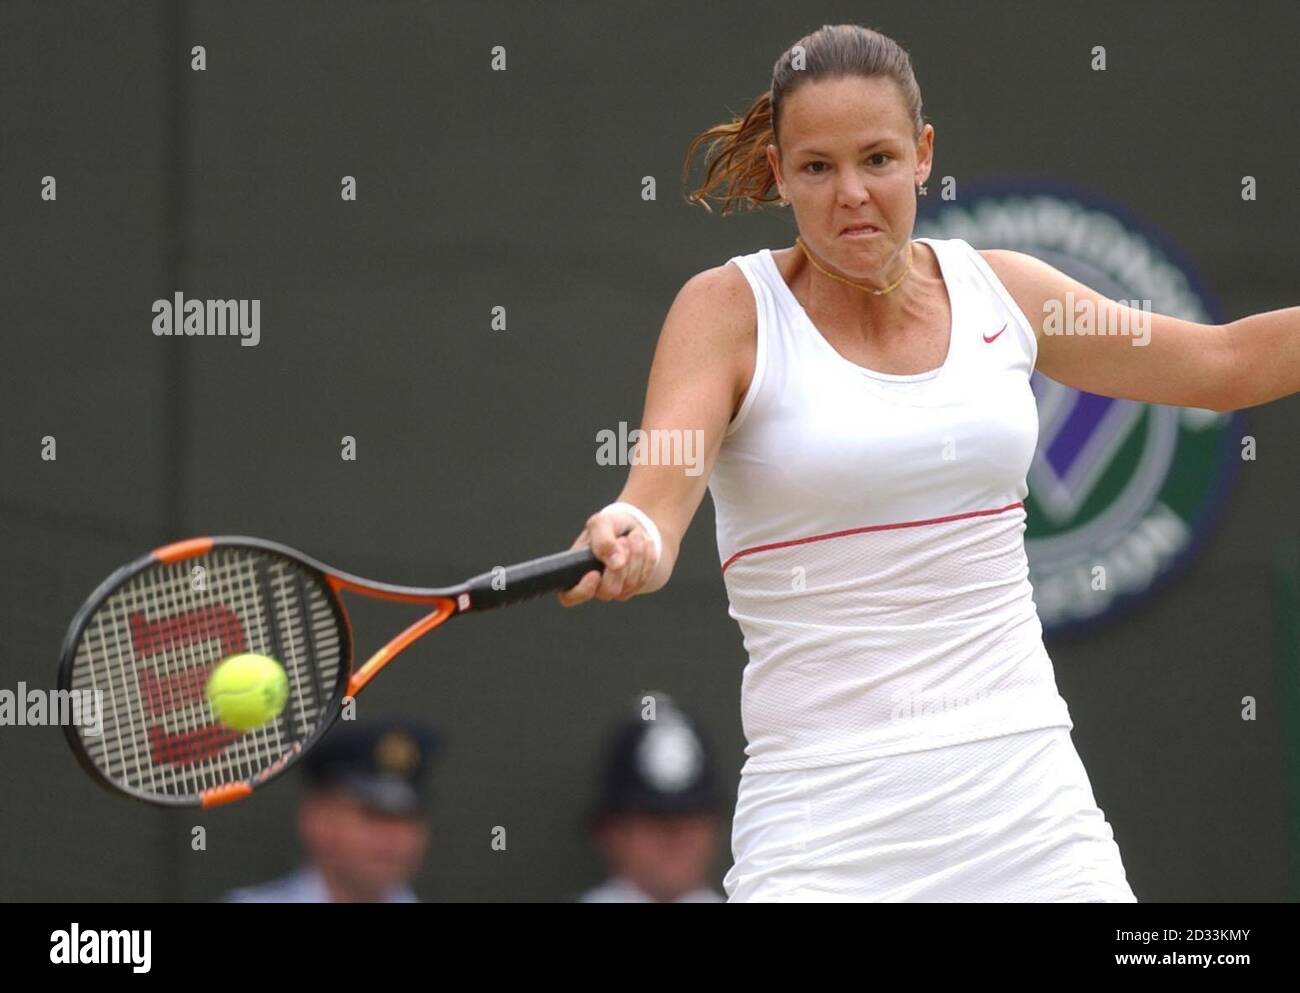 Lindsay Davenport from the USA in action against Karolina Sprem from  Croatia in the fourth round of the Ladies Single tournament of The Lawn  Tennis Championships at Wimbledon, London. Sprem knocked out